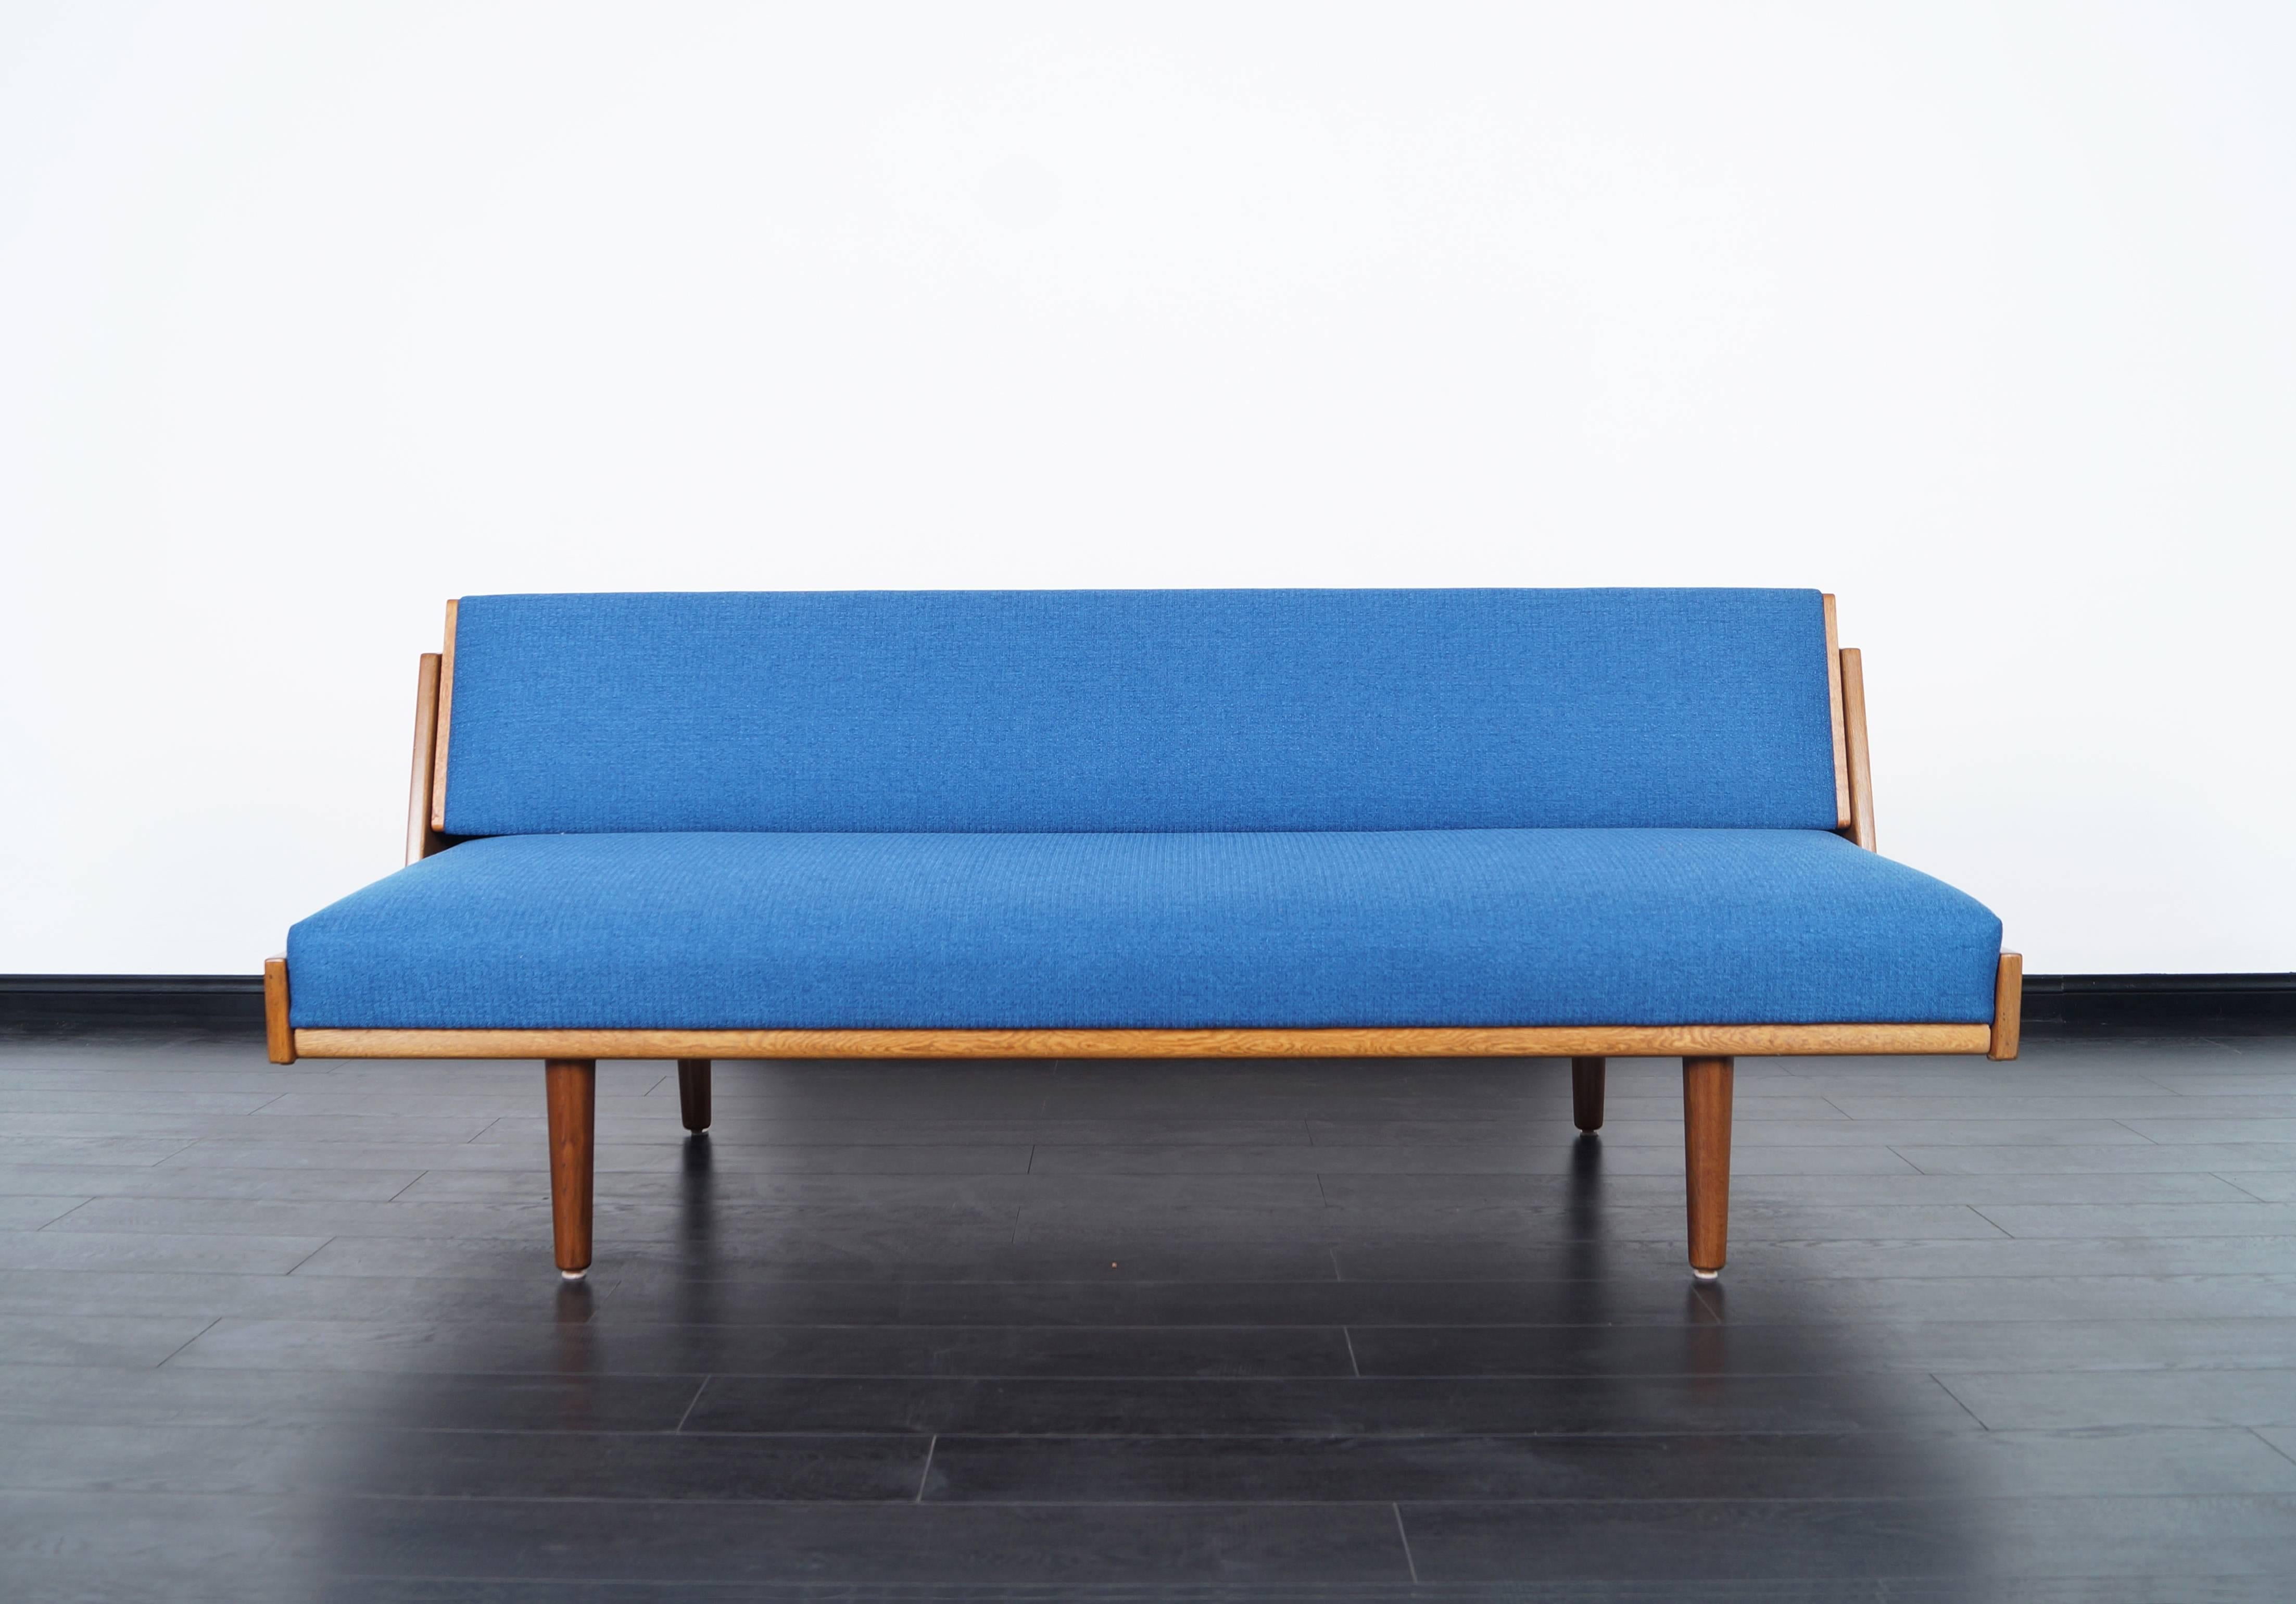 Danish modern daybed designed by Hans Wegner for GETAMA. Features a backrest that lifts up and locks in place to expose a size of a twin bed. Gives more space for lying down. Engraved with original designer label.